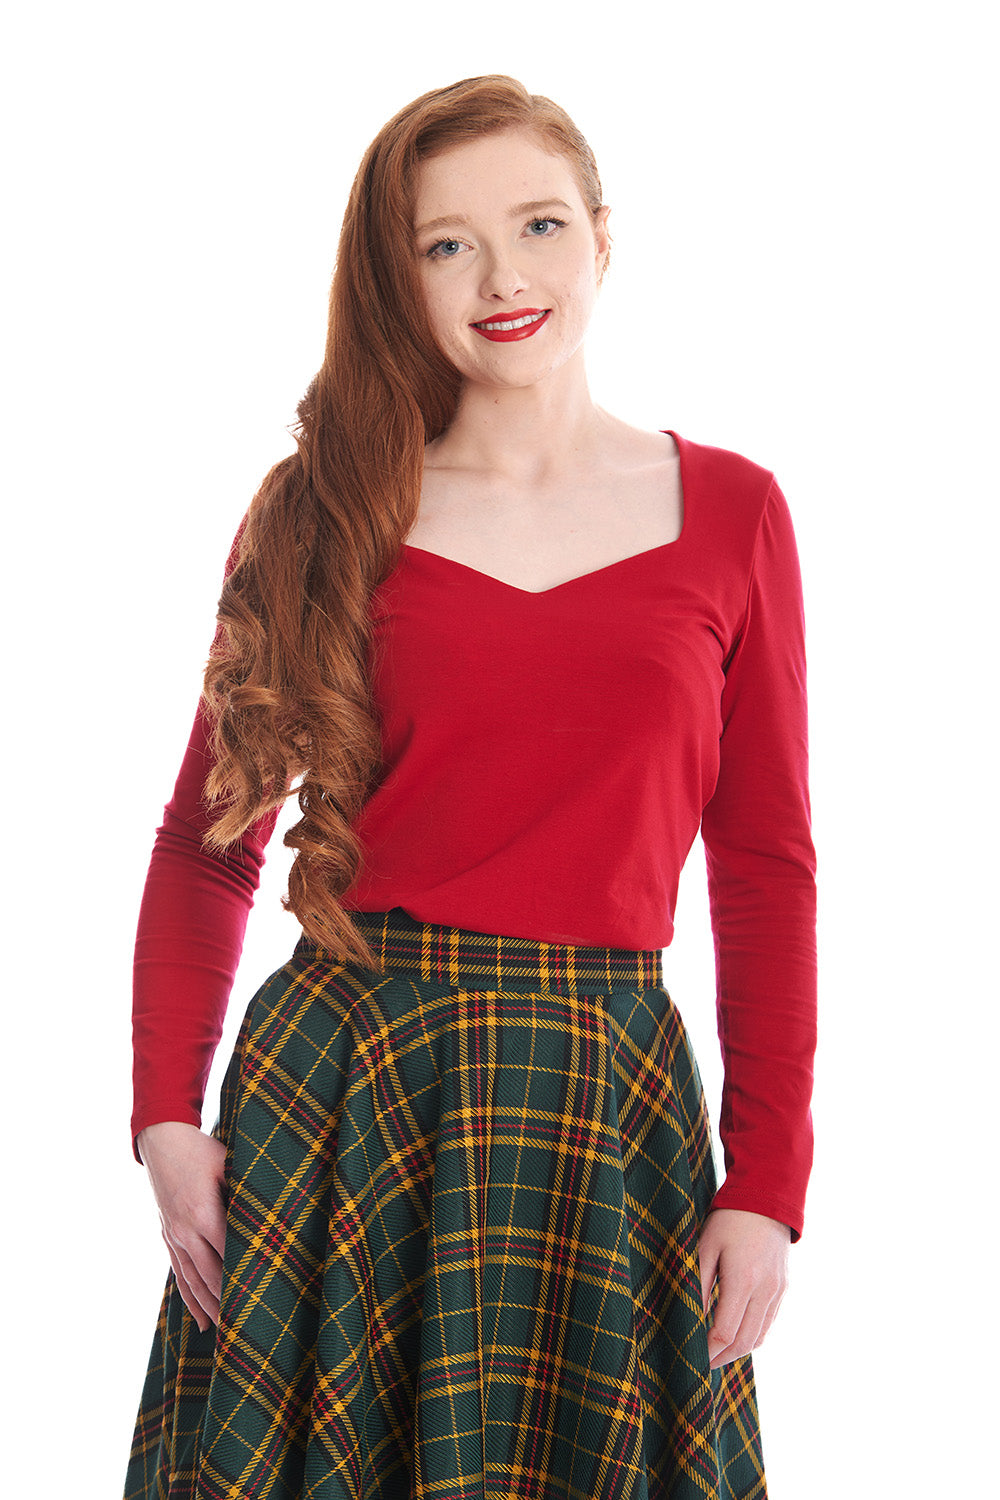 Banned Retro Sweetheart Top Red